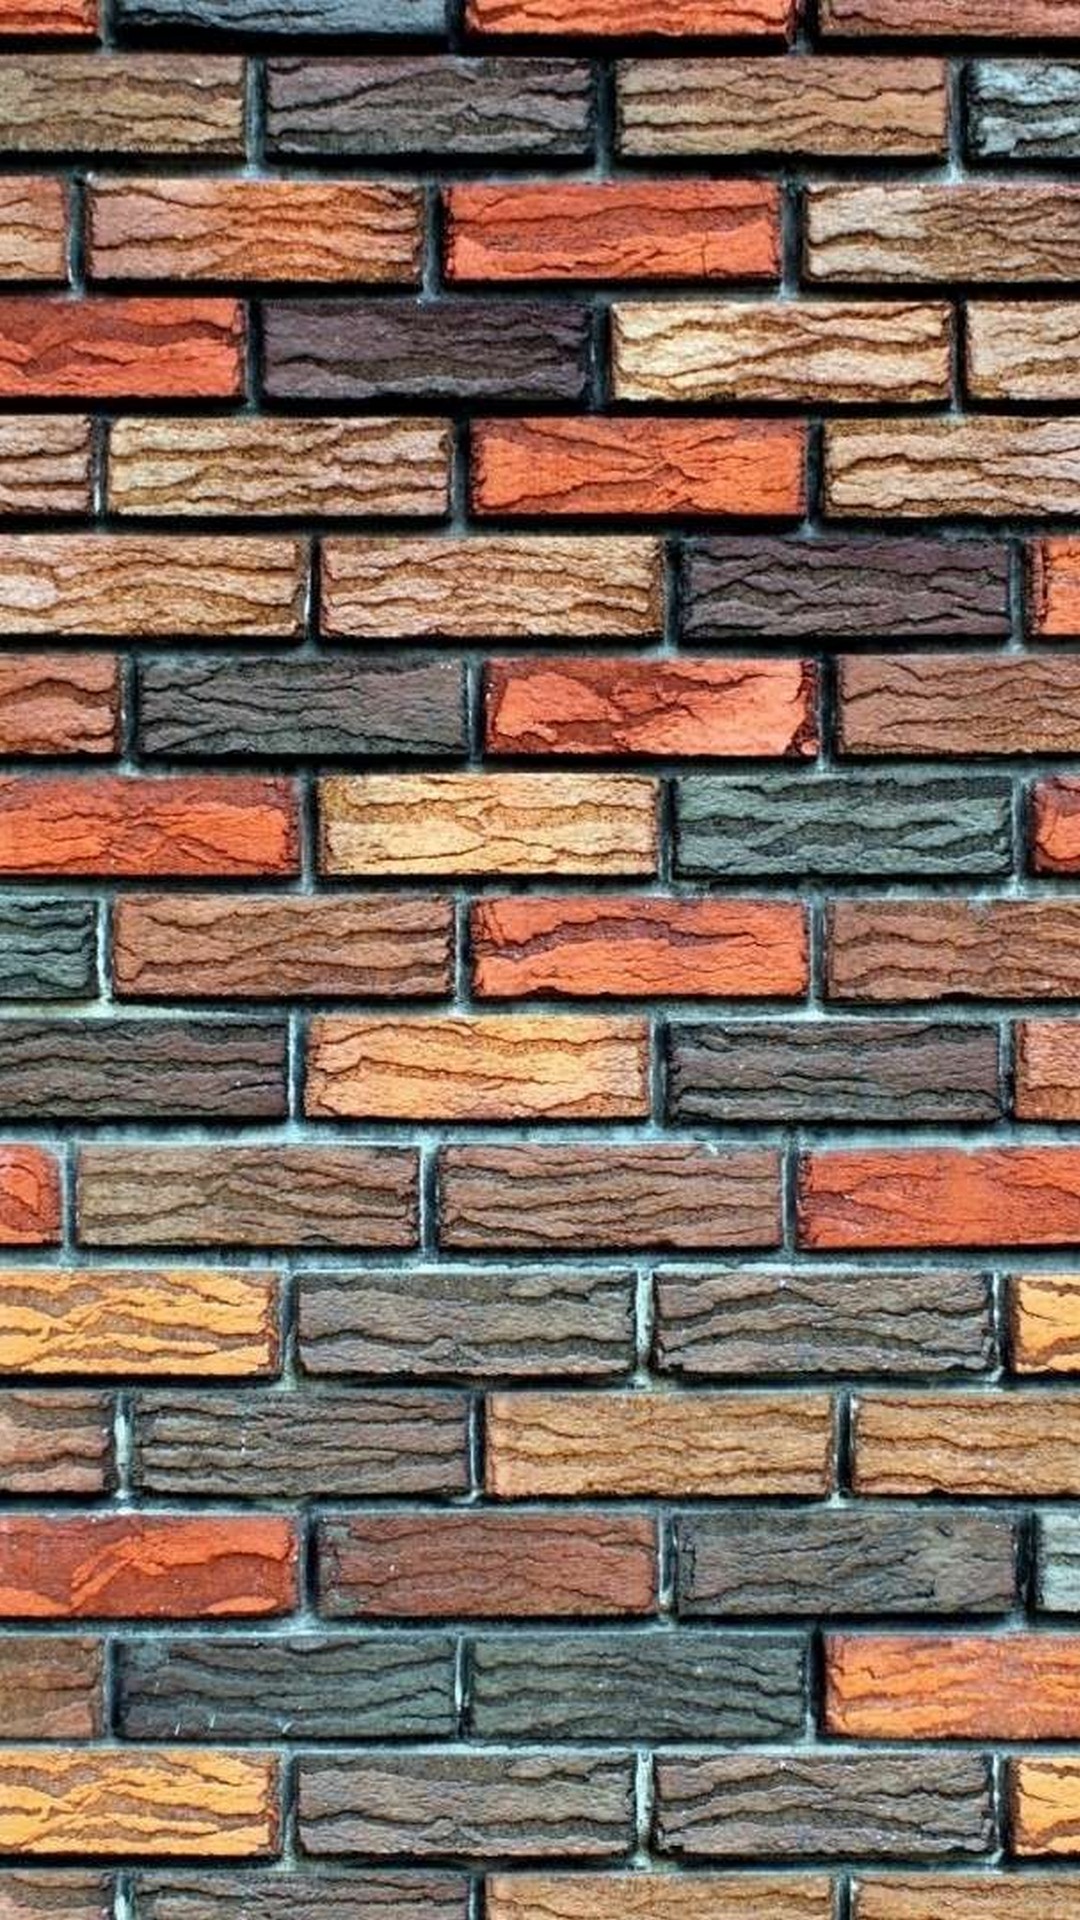 Brick Cell Phones Wallpaper with high-resolution 1080x1920 pixel. Download all Mobile Wallpapers and Use them as wallpapers for your iPhone, Tablet, iPad, Android and other mobile devices